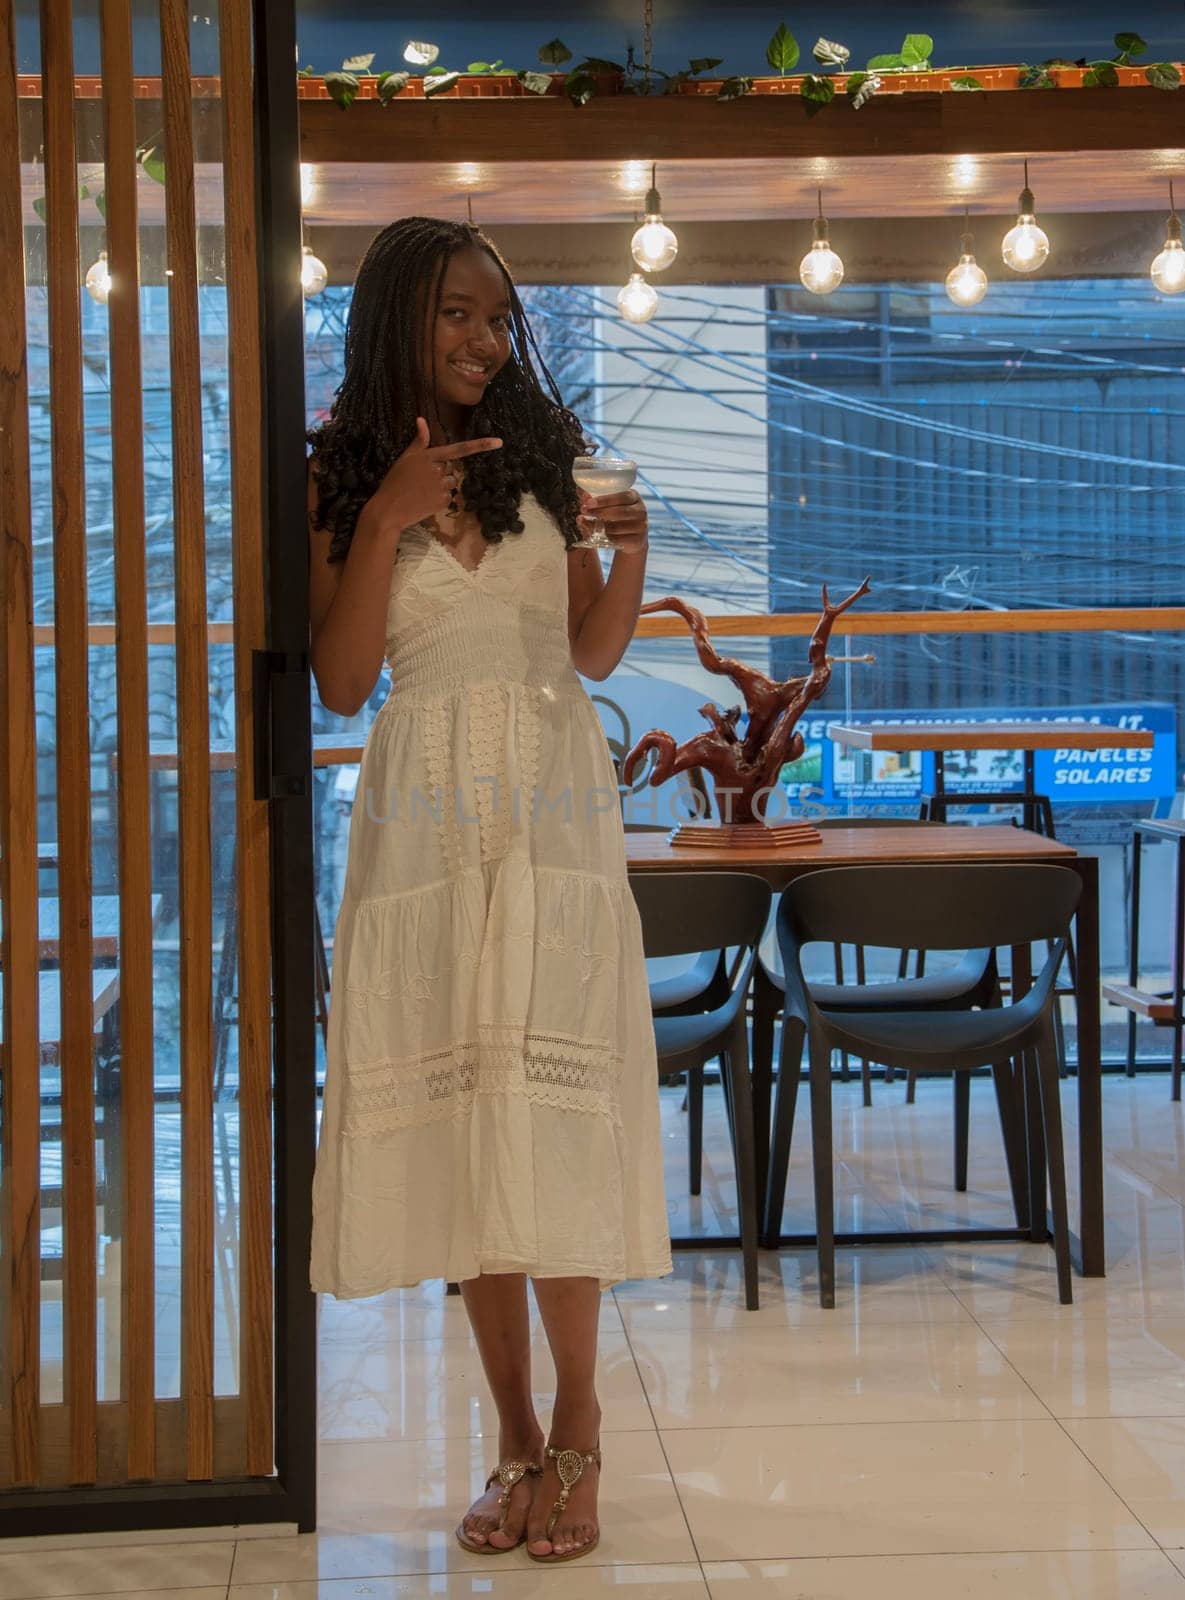 Vertical long shot of young African woman in white dress drinking a cocktail and looking up by Raulmartin